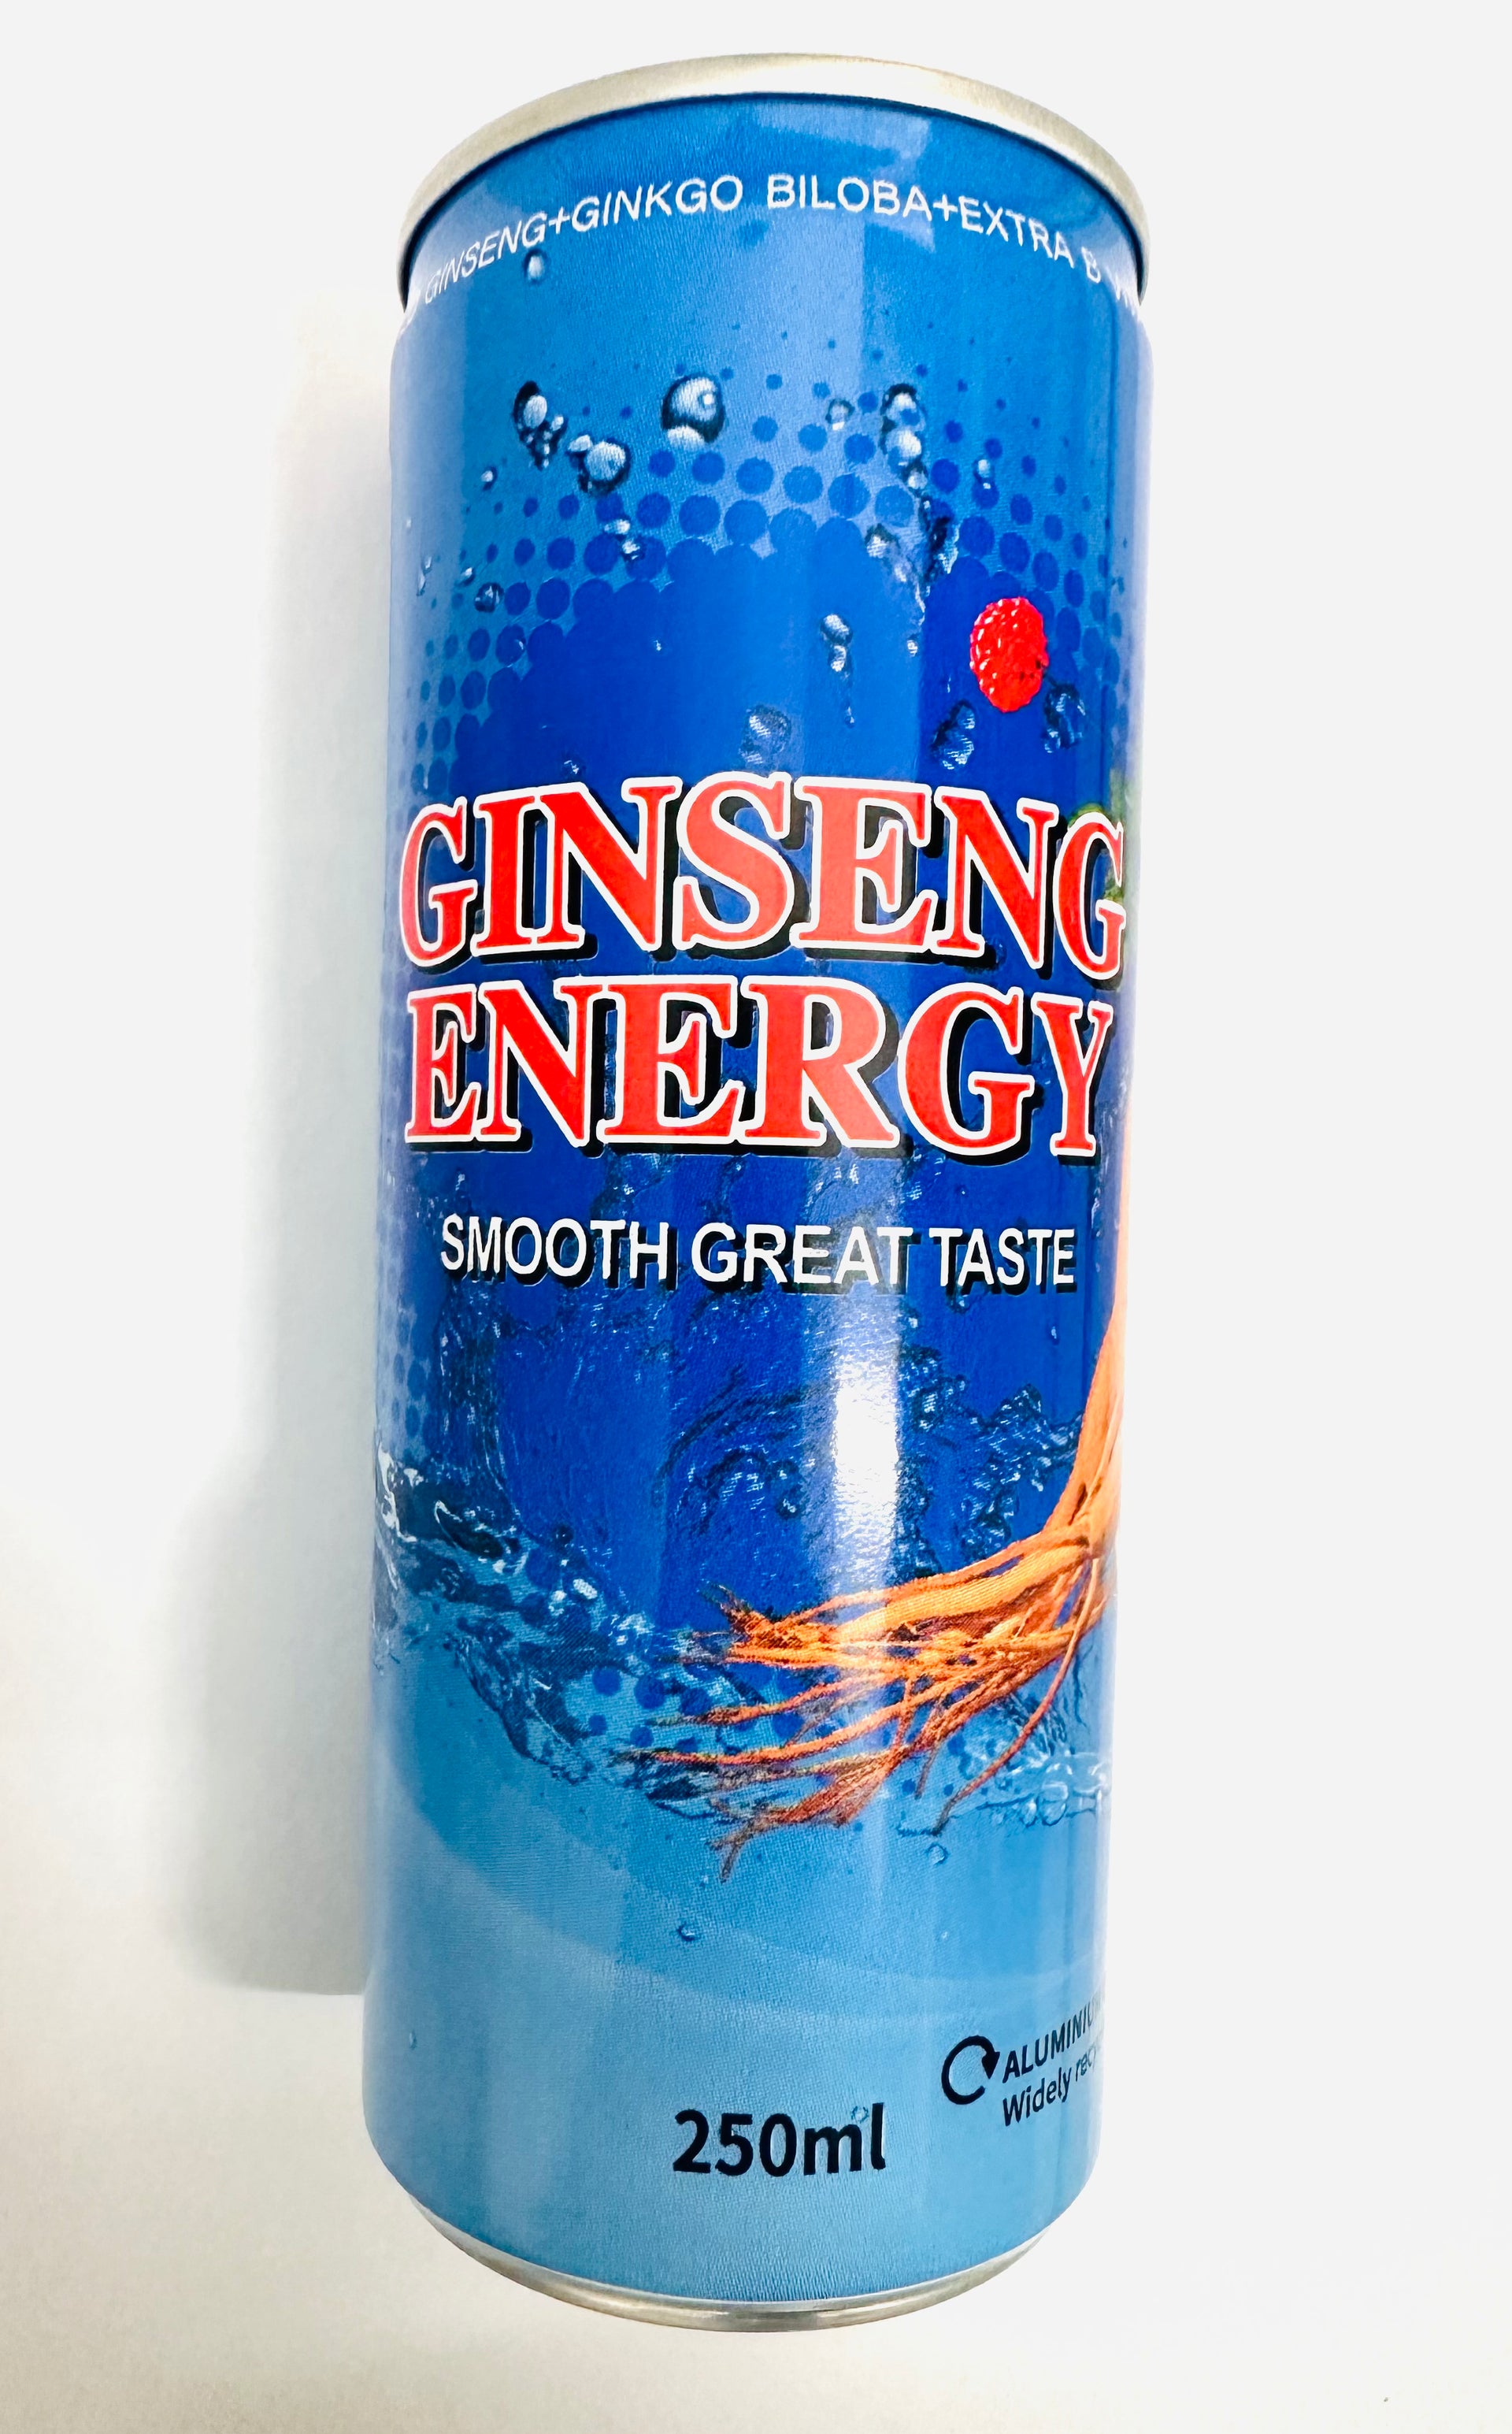 Ginseng for energy